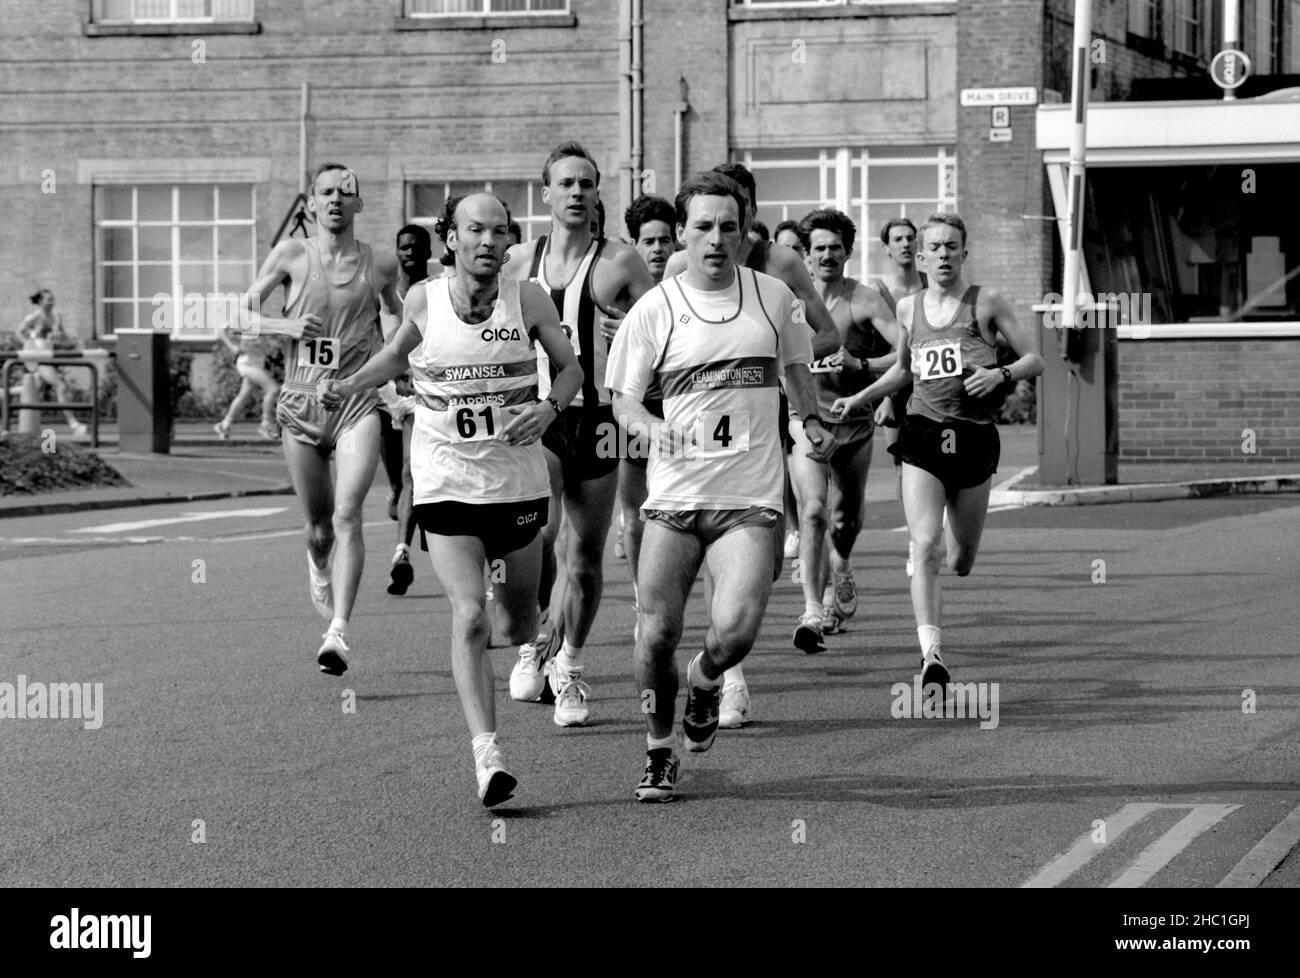 Runners in a road race at the Massey Ferguson factory site in Banner Lane, Coventry, UK Stock Photo